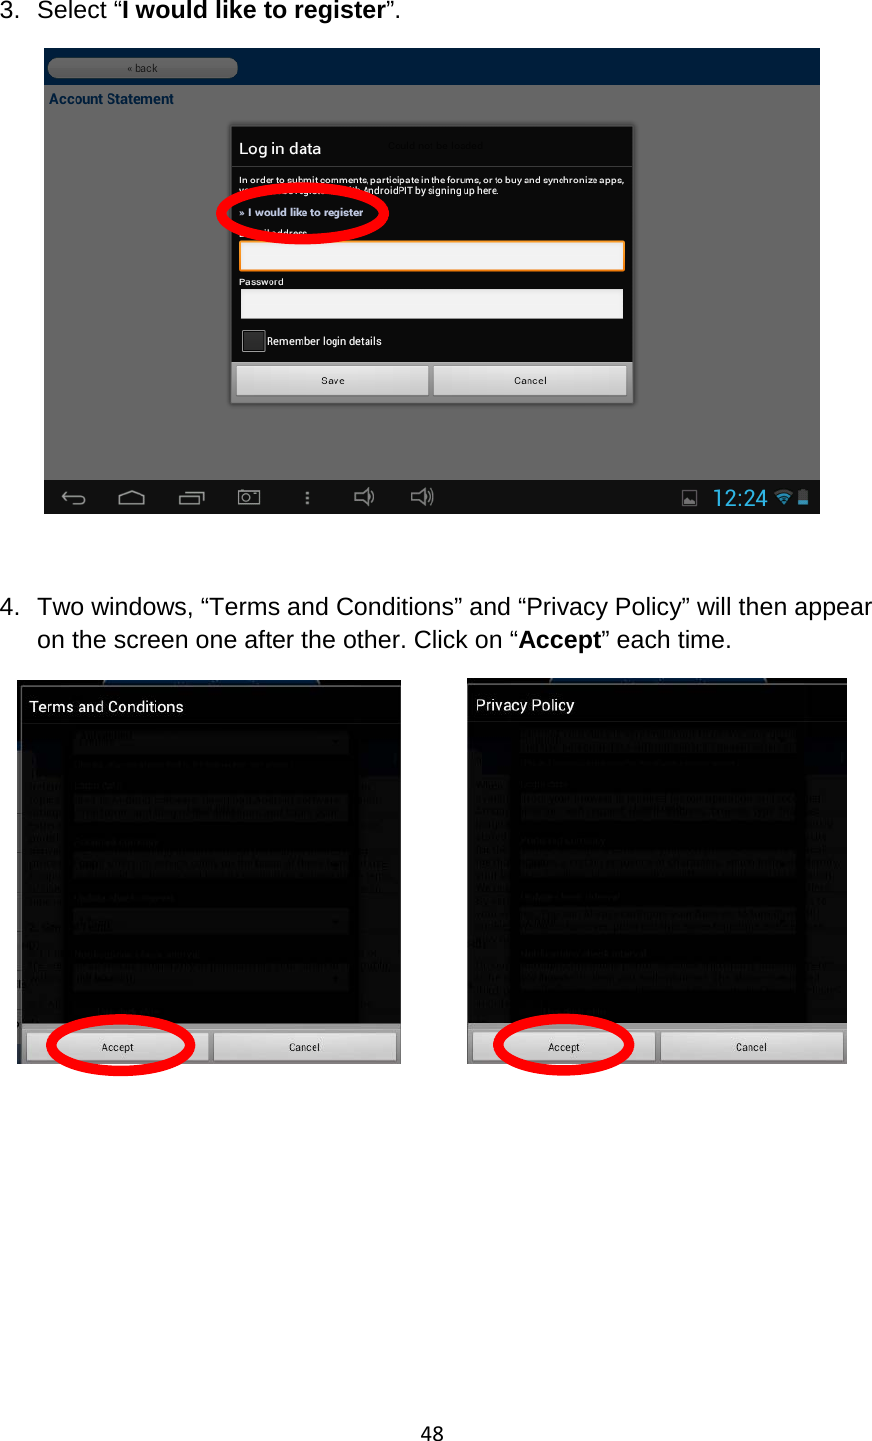 48  3. Select “I would like to register”.    4. Two windows, “Terms and Conditions” and “Privacy Policy” will then appear on the screen one after the other. Click on “Accept” each time.         